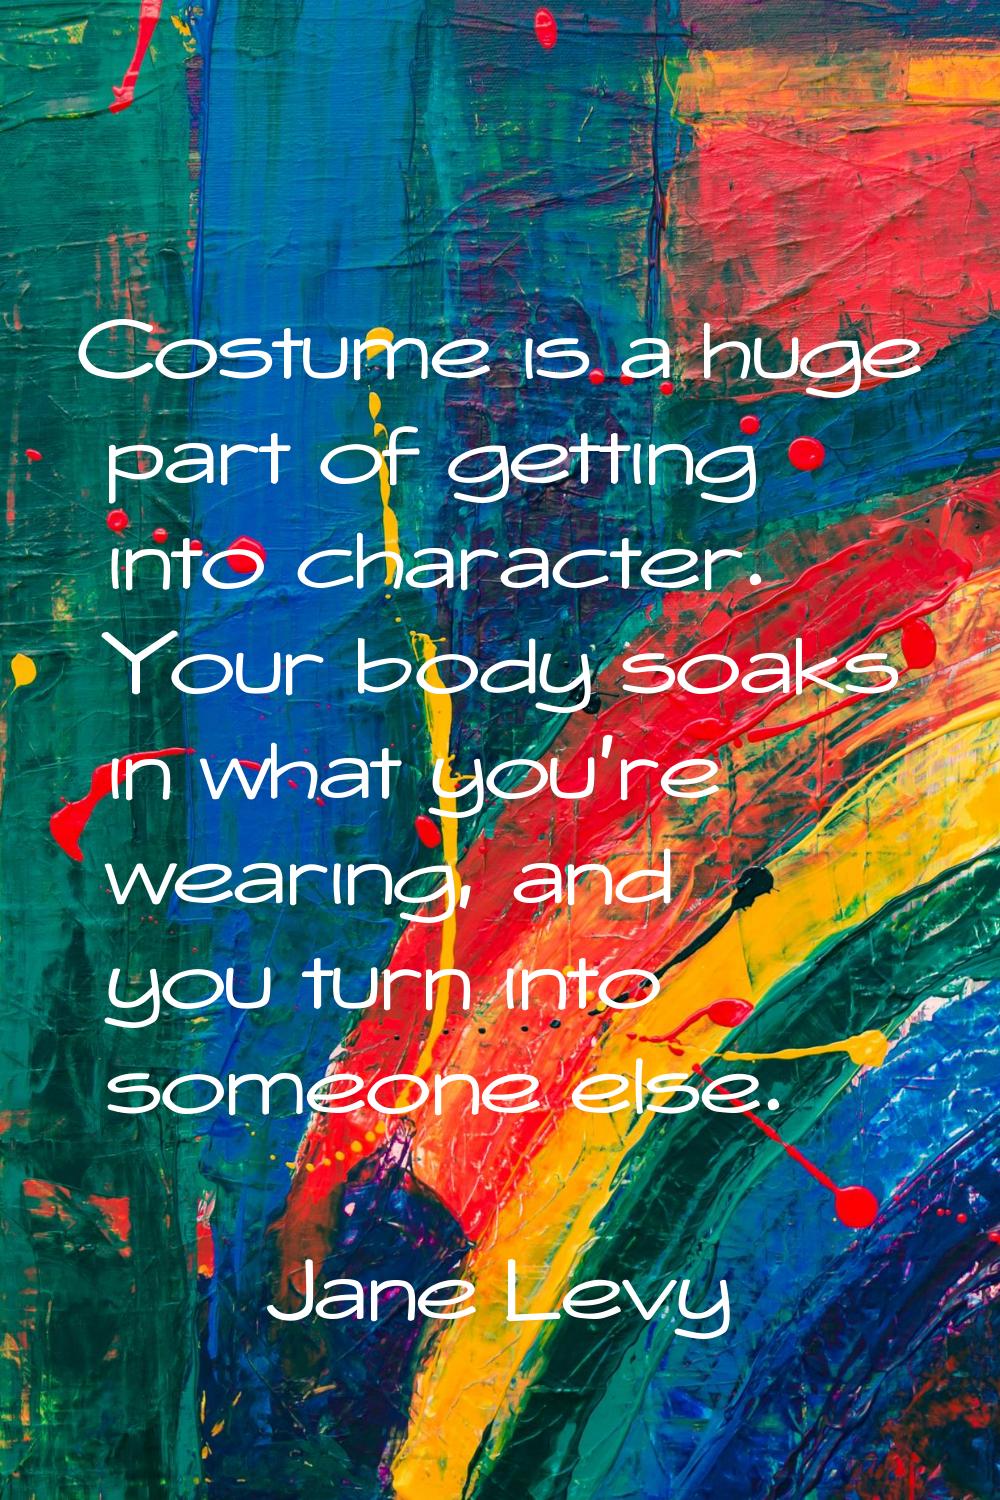 Costume is a huge part of getting into character. Your body soaks in what you're wearing, and you t